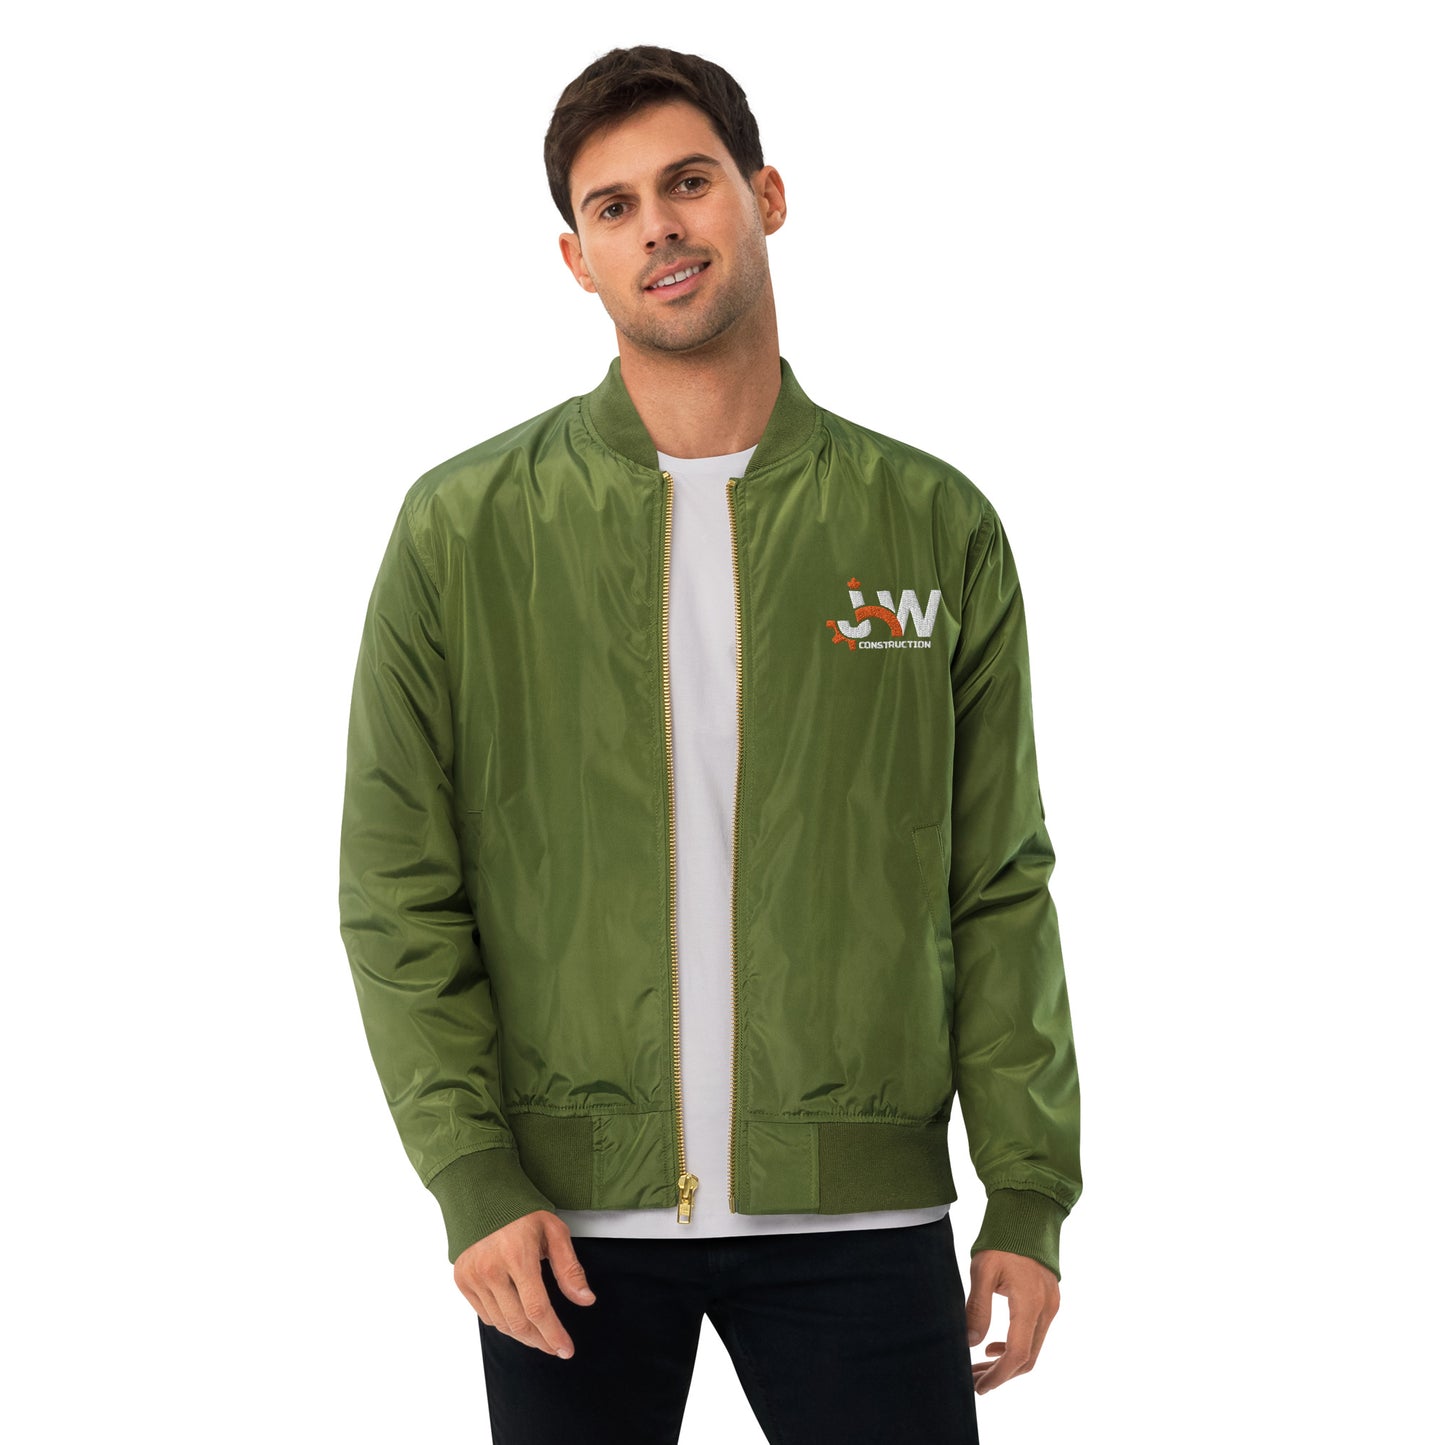 JHW Premium Bomber Jacket with Embroidery